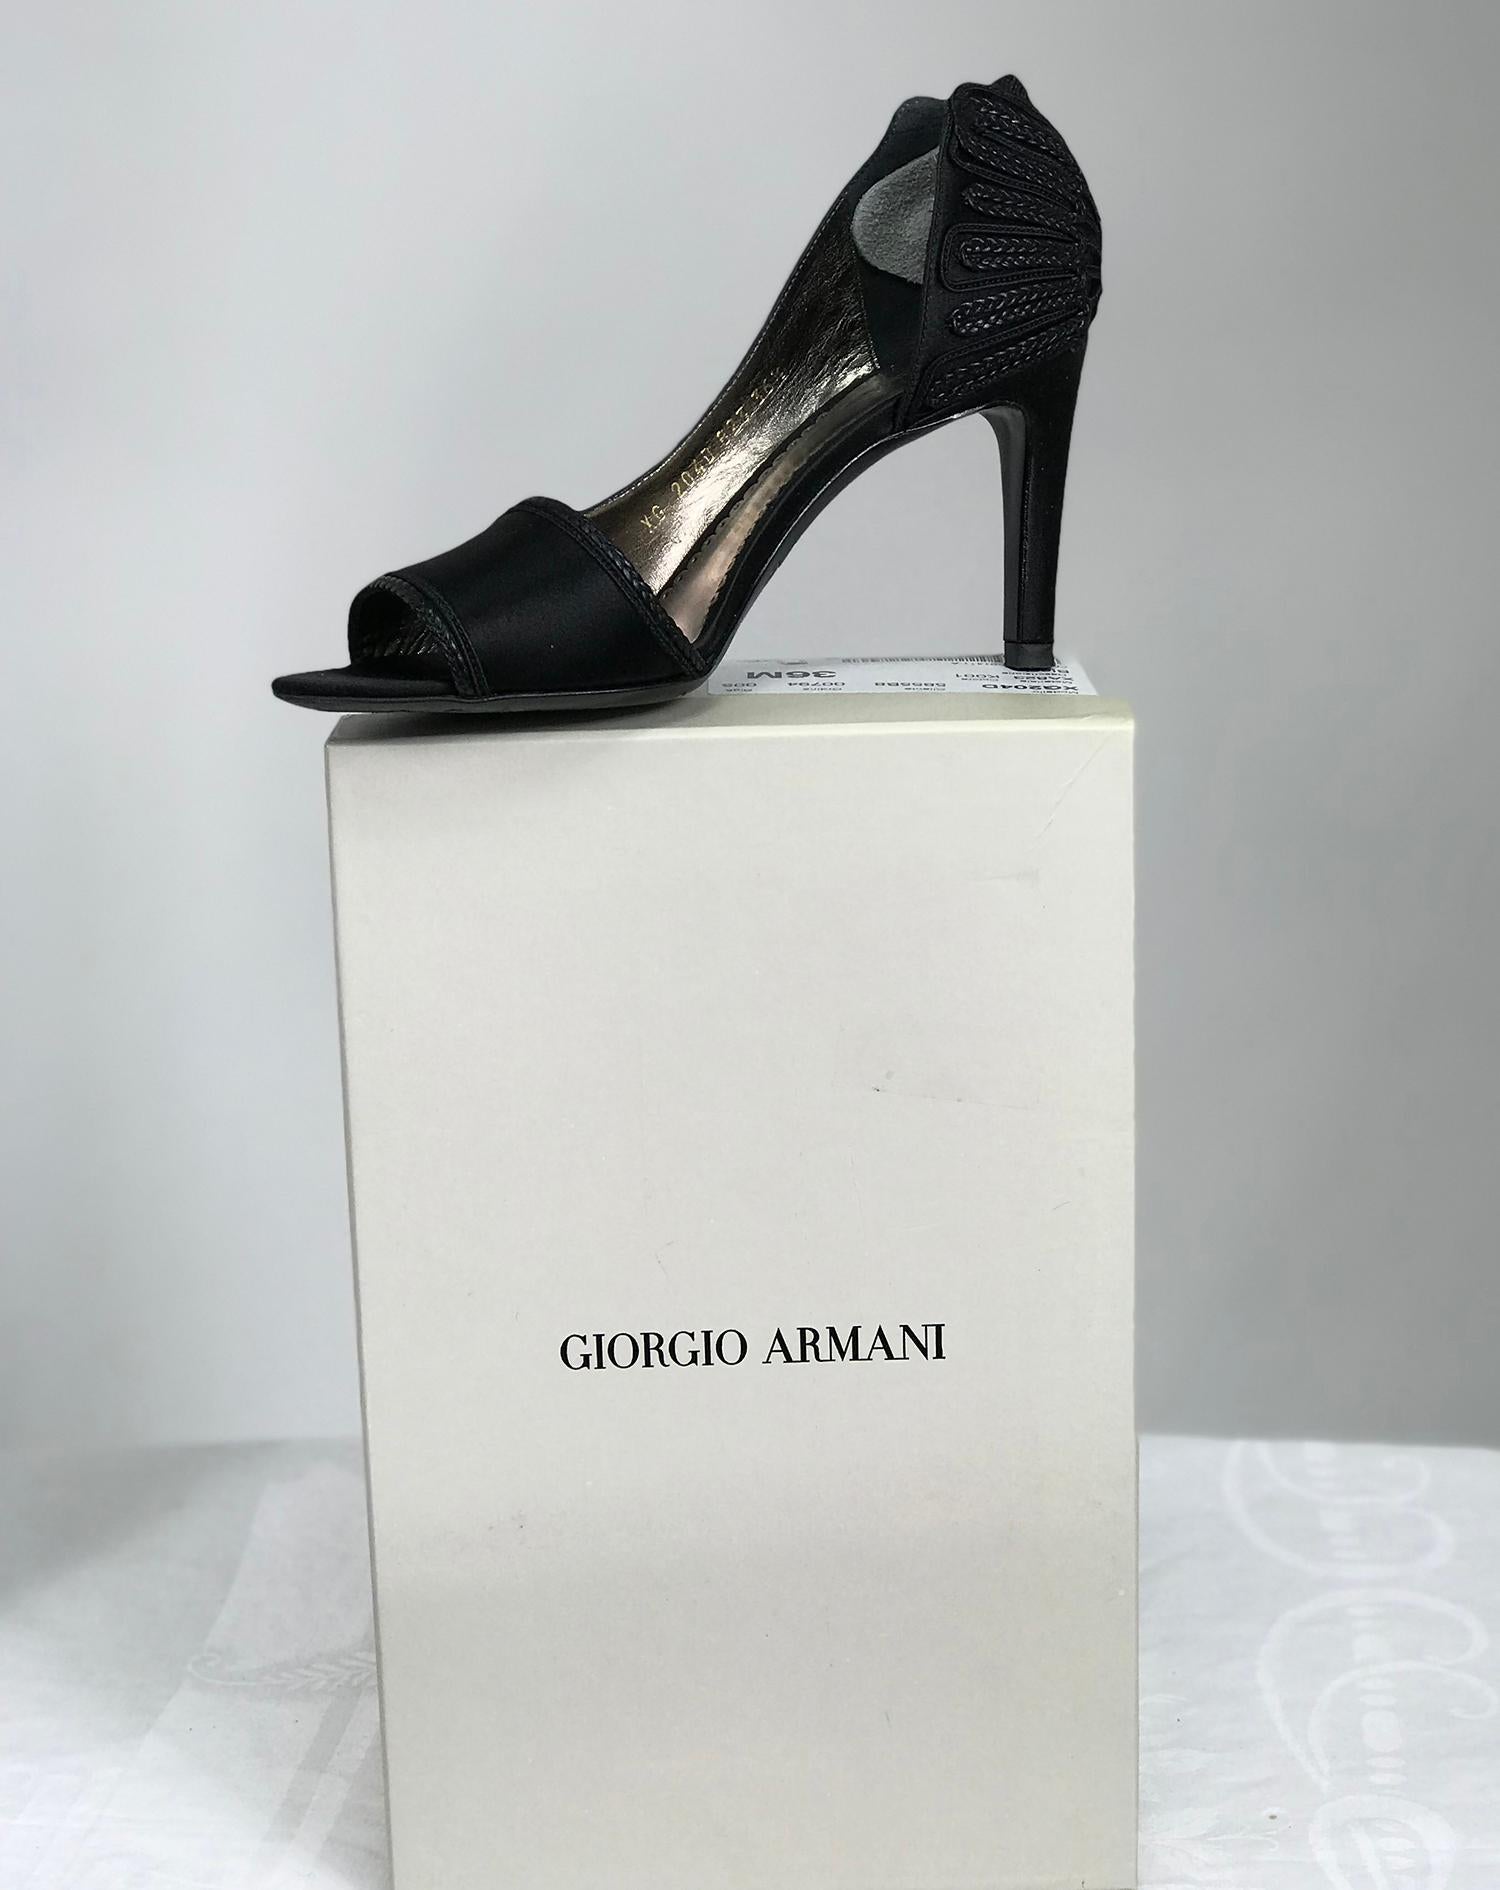 Giorgio Armani black saitn d'orsay high heel pumps with passementerie detail at heel back, 36 M.  3 1/2 inch heels. These beautiful shoes have a narrow braid band trim at the front and the back are appliqued like wings with open work. Black satin,